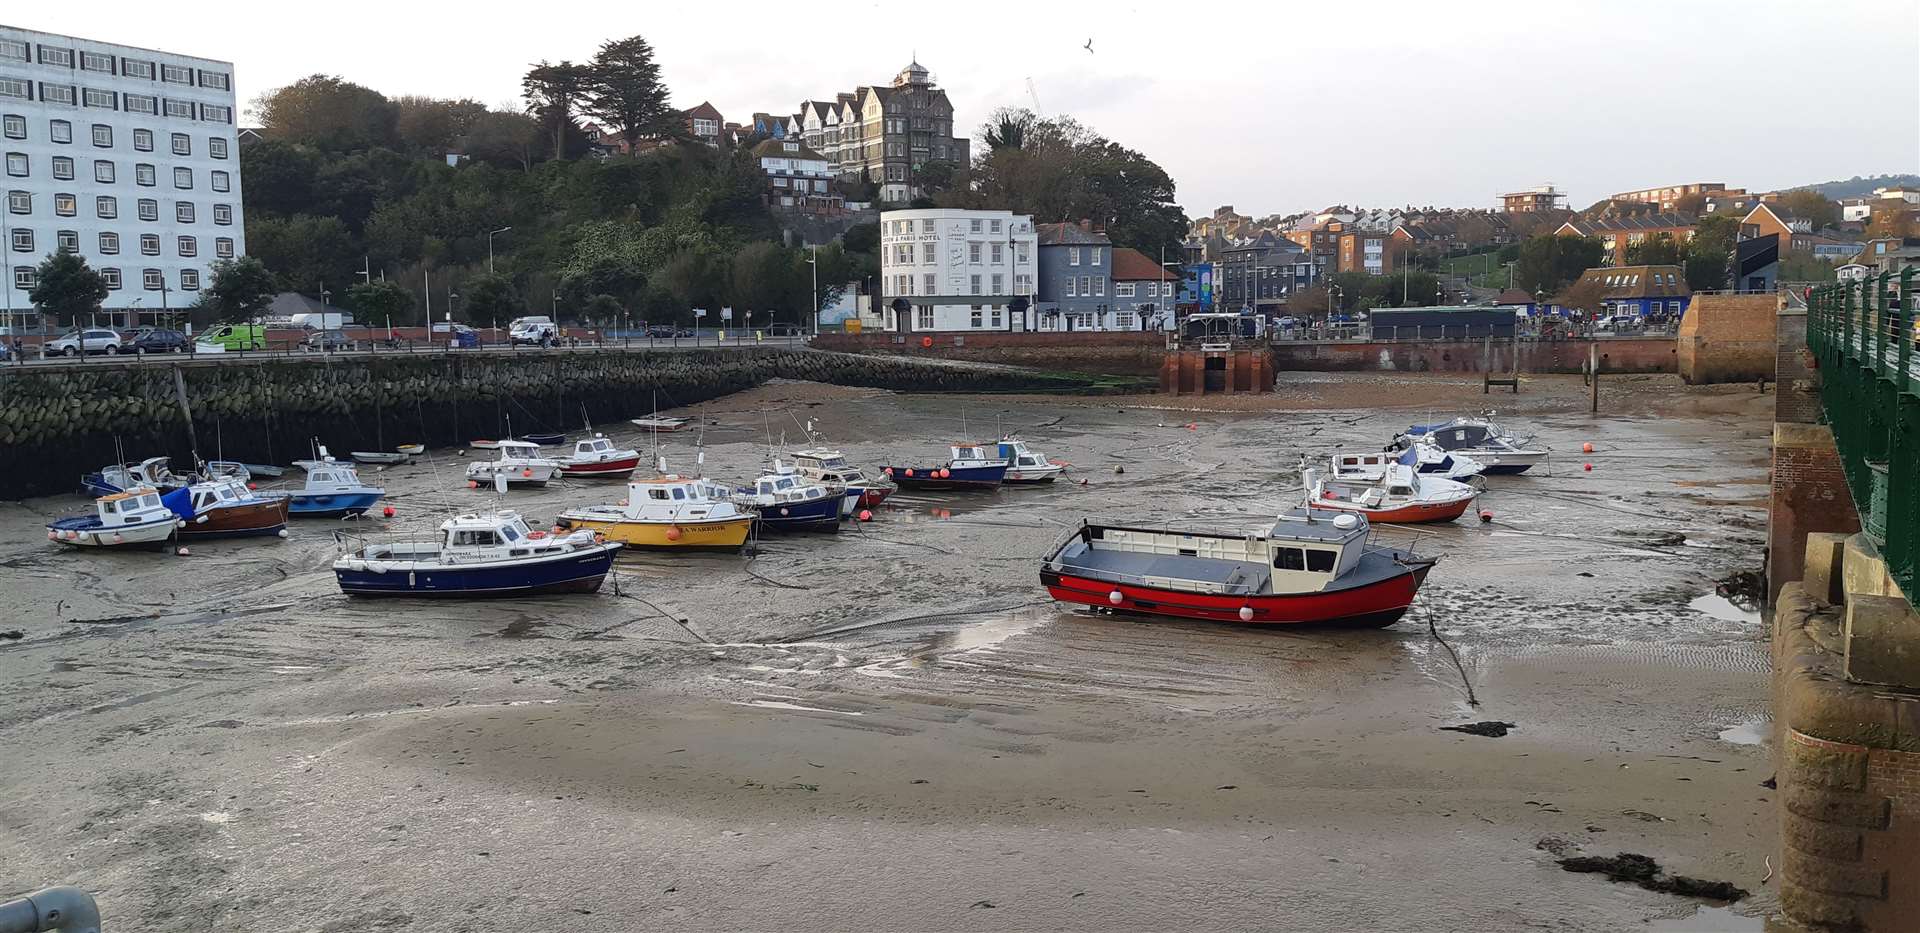 Folkestone Harbour, where a man this afternoon became stuck in deep mud. Picture: Sam Lennon KMG